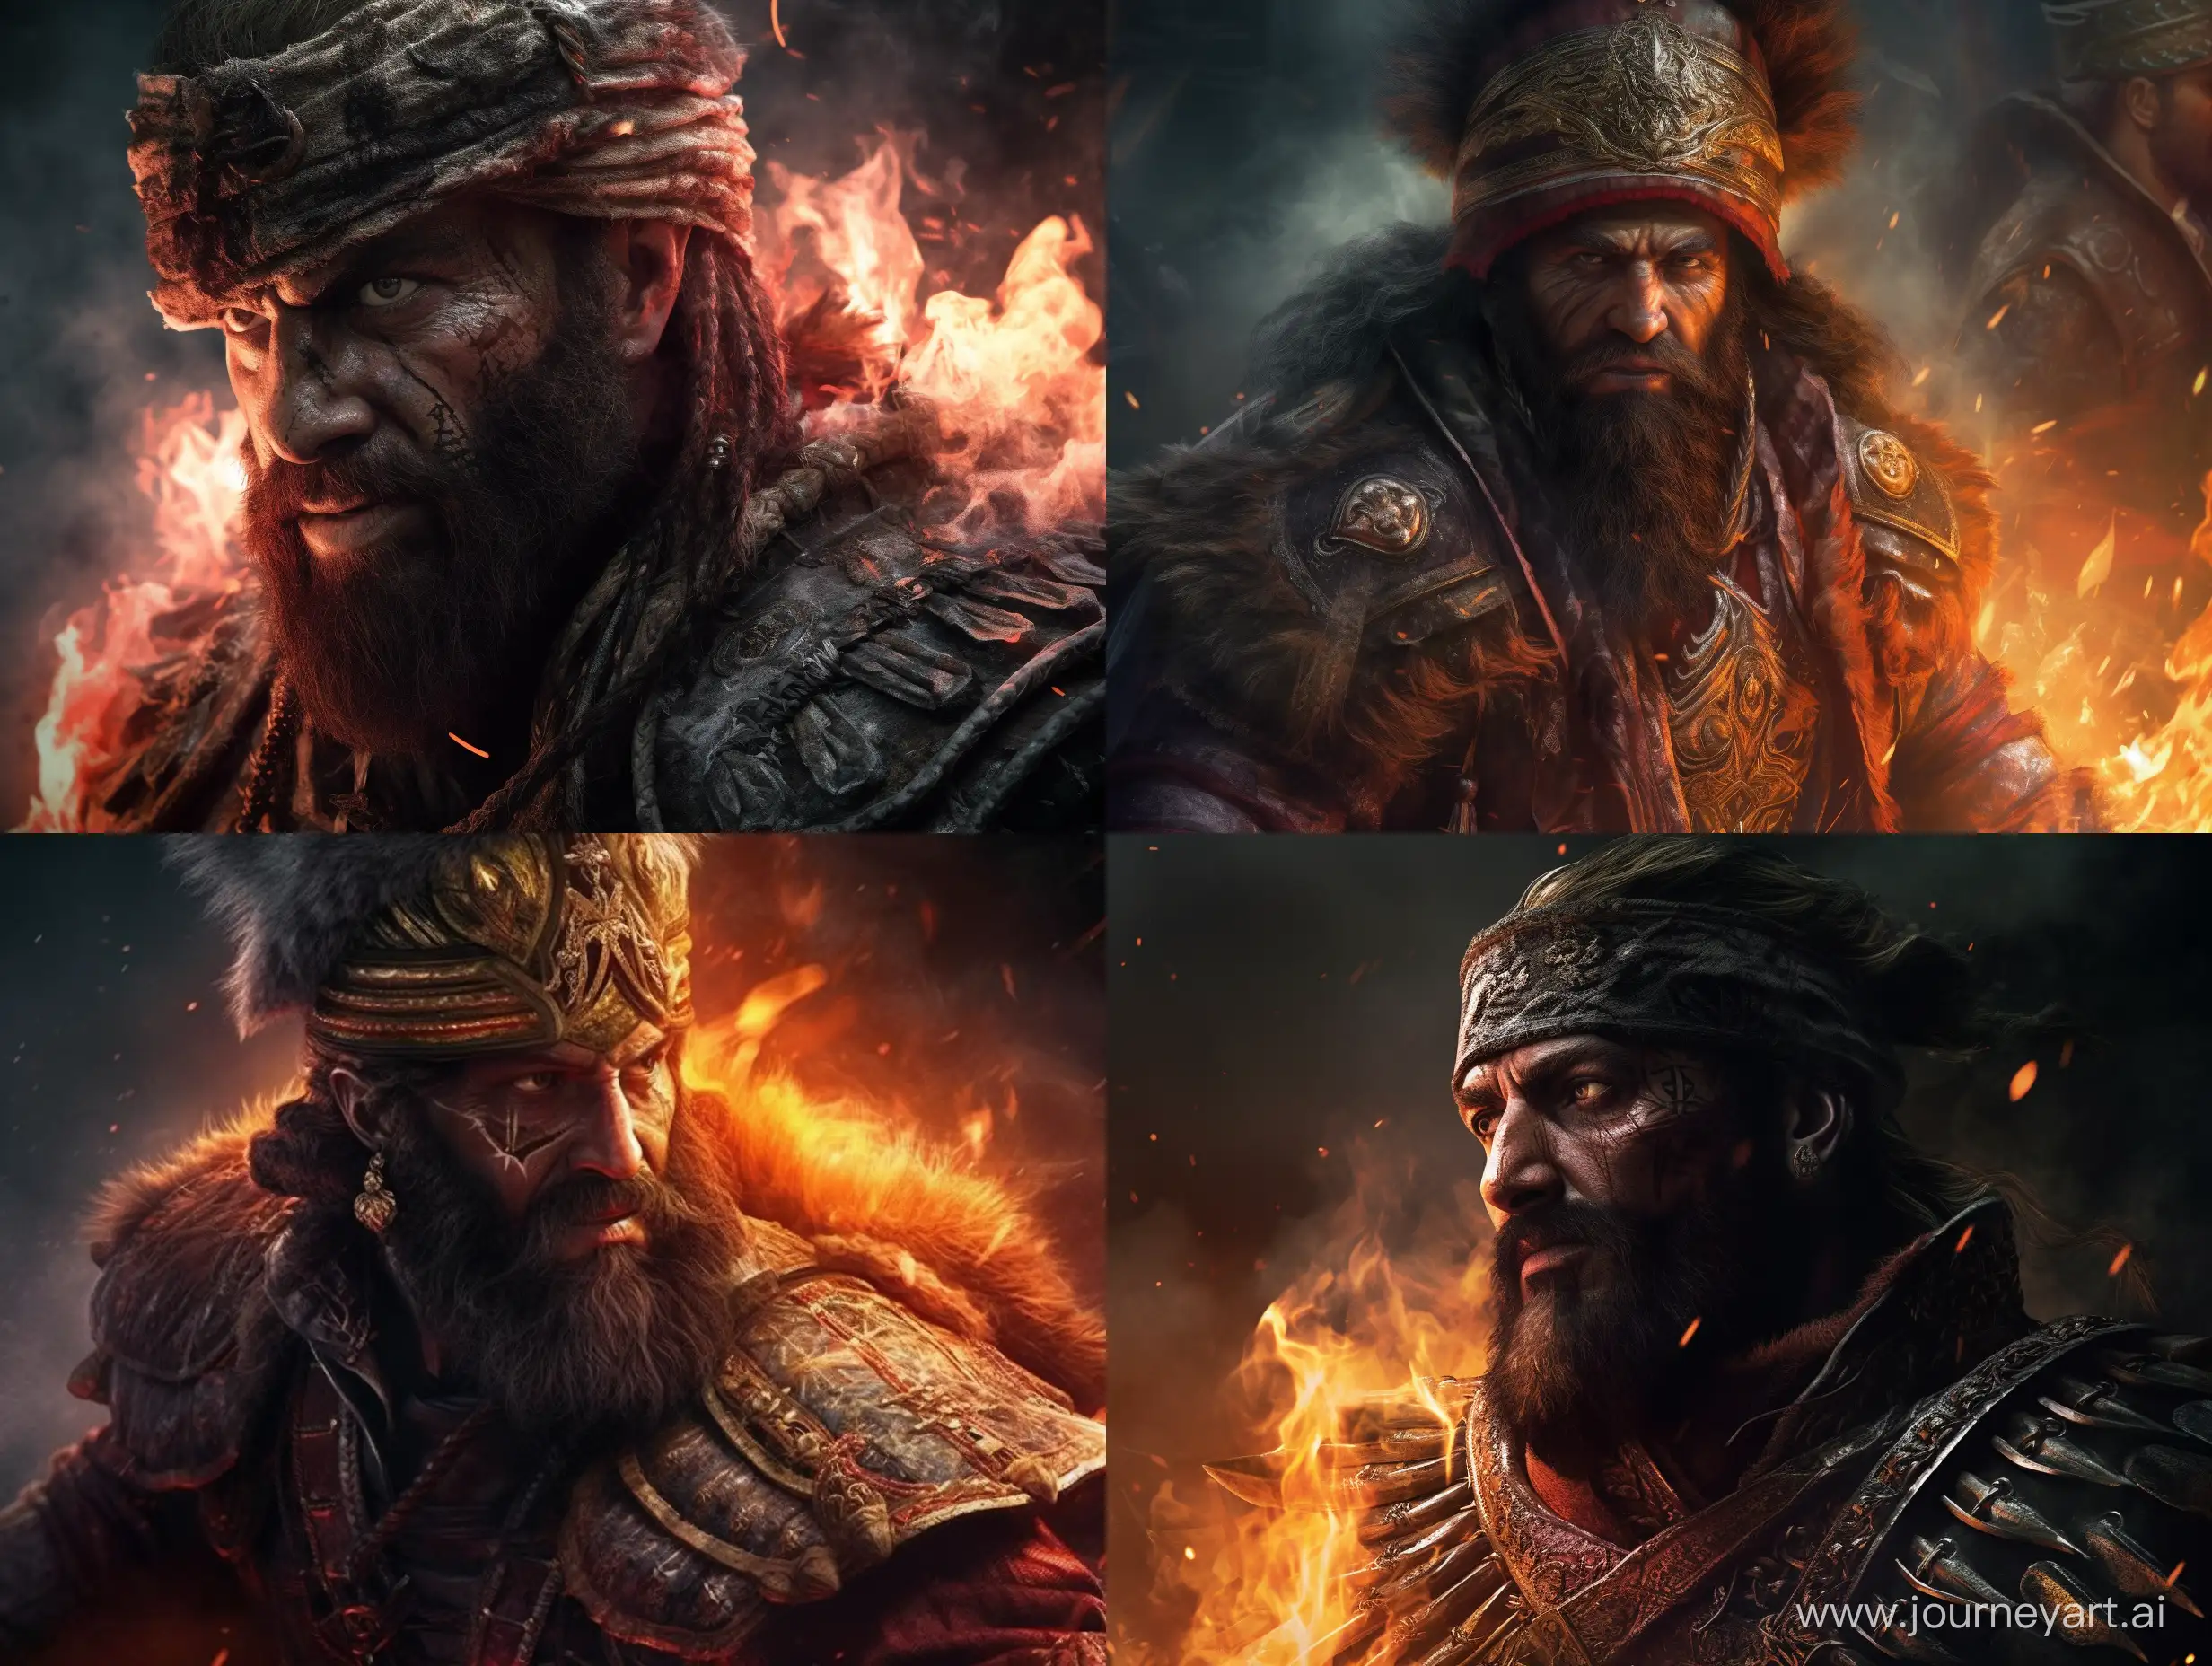 /imagine prompt: A photorealistic photo that captures the essence of Blackbeard the pirate in the middle of a war. The atmosphere is intense, with the lighting emphasizing the details of the fire and smoke around him. The image has a high quality, with intricate details in Blackbeard's face and clothing. Blackbeard is shown in a close-up, with a confident expression on his face as he looks straight ahead. His beard and hair are wild and unkempt, adding to the intensity of the scene. The background is filled with smoke and fire, emphasizing the chaos of the war around him. The composition is dramatic, with the focus on Blackbeard and his commanding presence. The image is highly detailed, with intricate details in Blackbeard's face, clothing, and surroundings. The image has a high quality, with a resolution of 8K that allows for every detail to be seen clearly. It's a perfect fit for those who appreciate the intensity and drama of historical battles and the iconic figure of Blackbeard the pirate. --ar 4:3 --s 1000 --v 5 --q 2